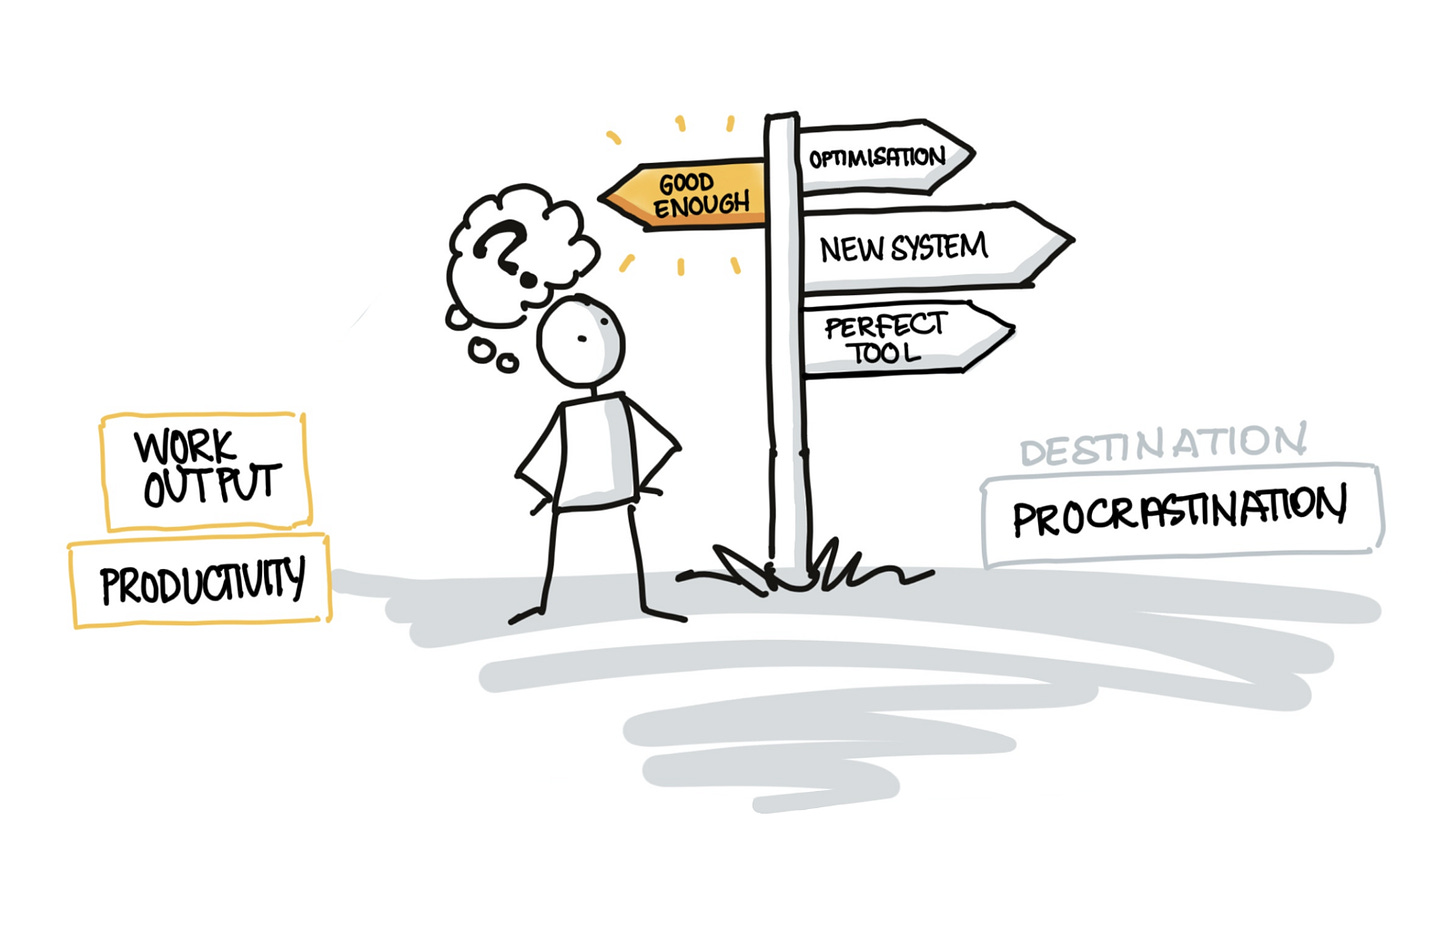 A stick figure is looking at a signpost, a thought bubble over their head contains a question mark. The signpost has one arrow labelled “Good Enough” pointing left, toward the words “Work Output” and “Productivity”. There are three more arrows on the same post pointing right, labelled “Optimisation”, “New System”, and “Perfect Tool”, facing the words “Destination Procrastination”.